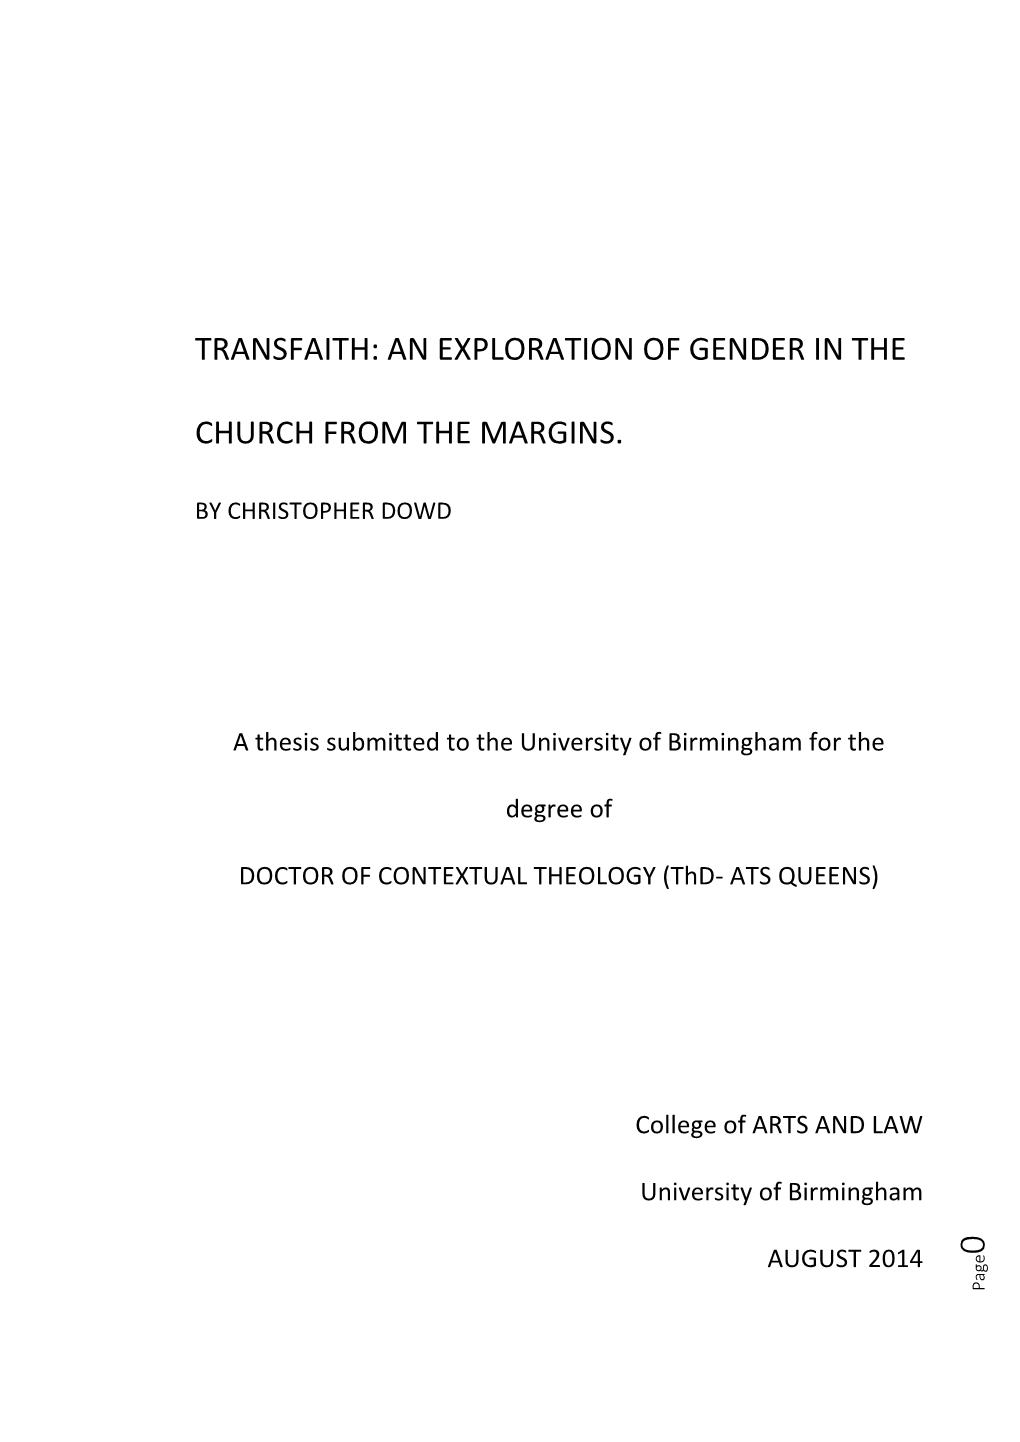 Transfaith: an Exploration of Gender in the Church from the Margins